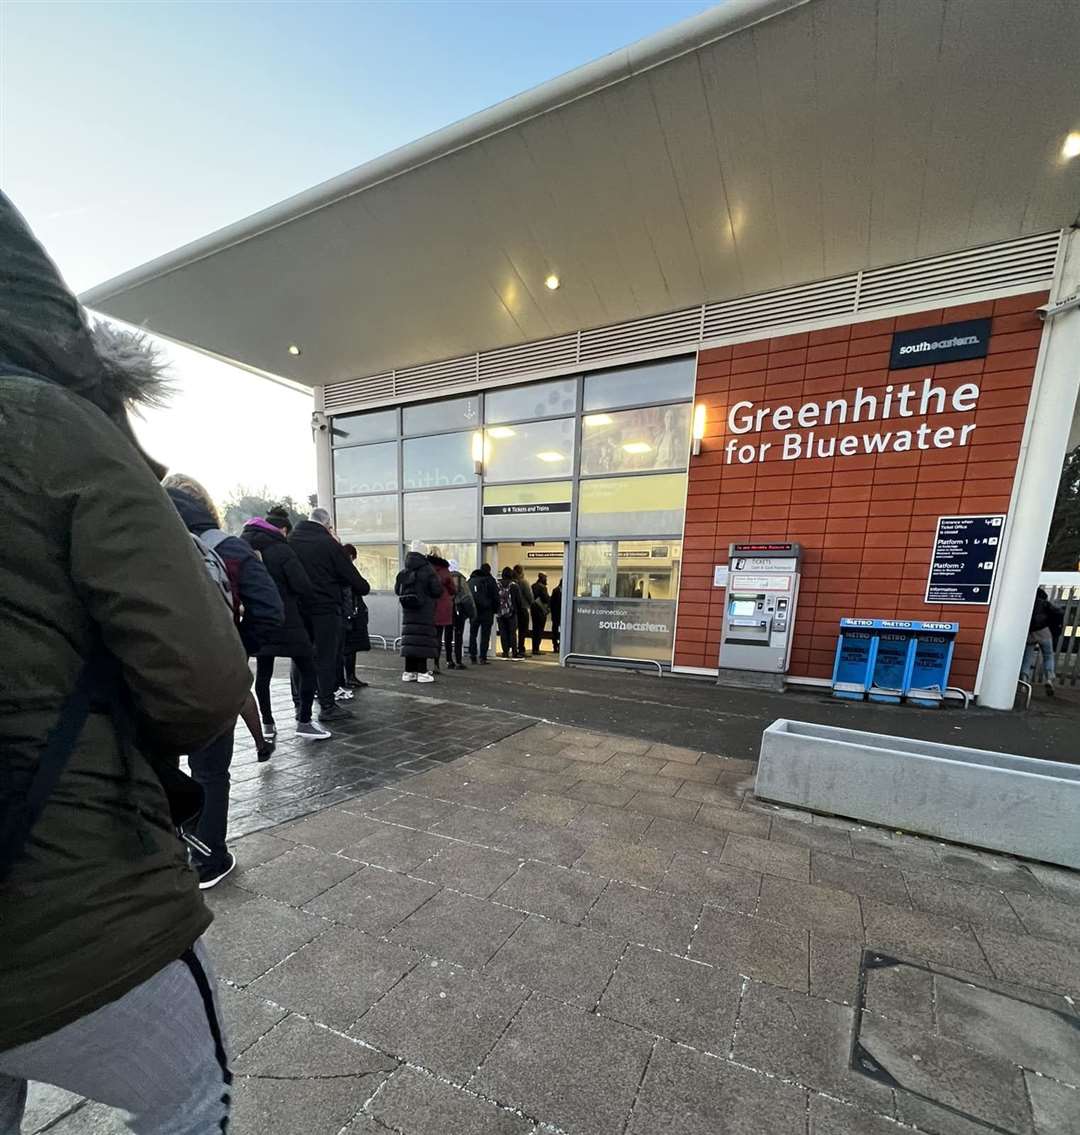 There were long queues outside Greenhithe Station this morning due to a broken ticket machine. Photo: Marina